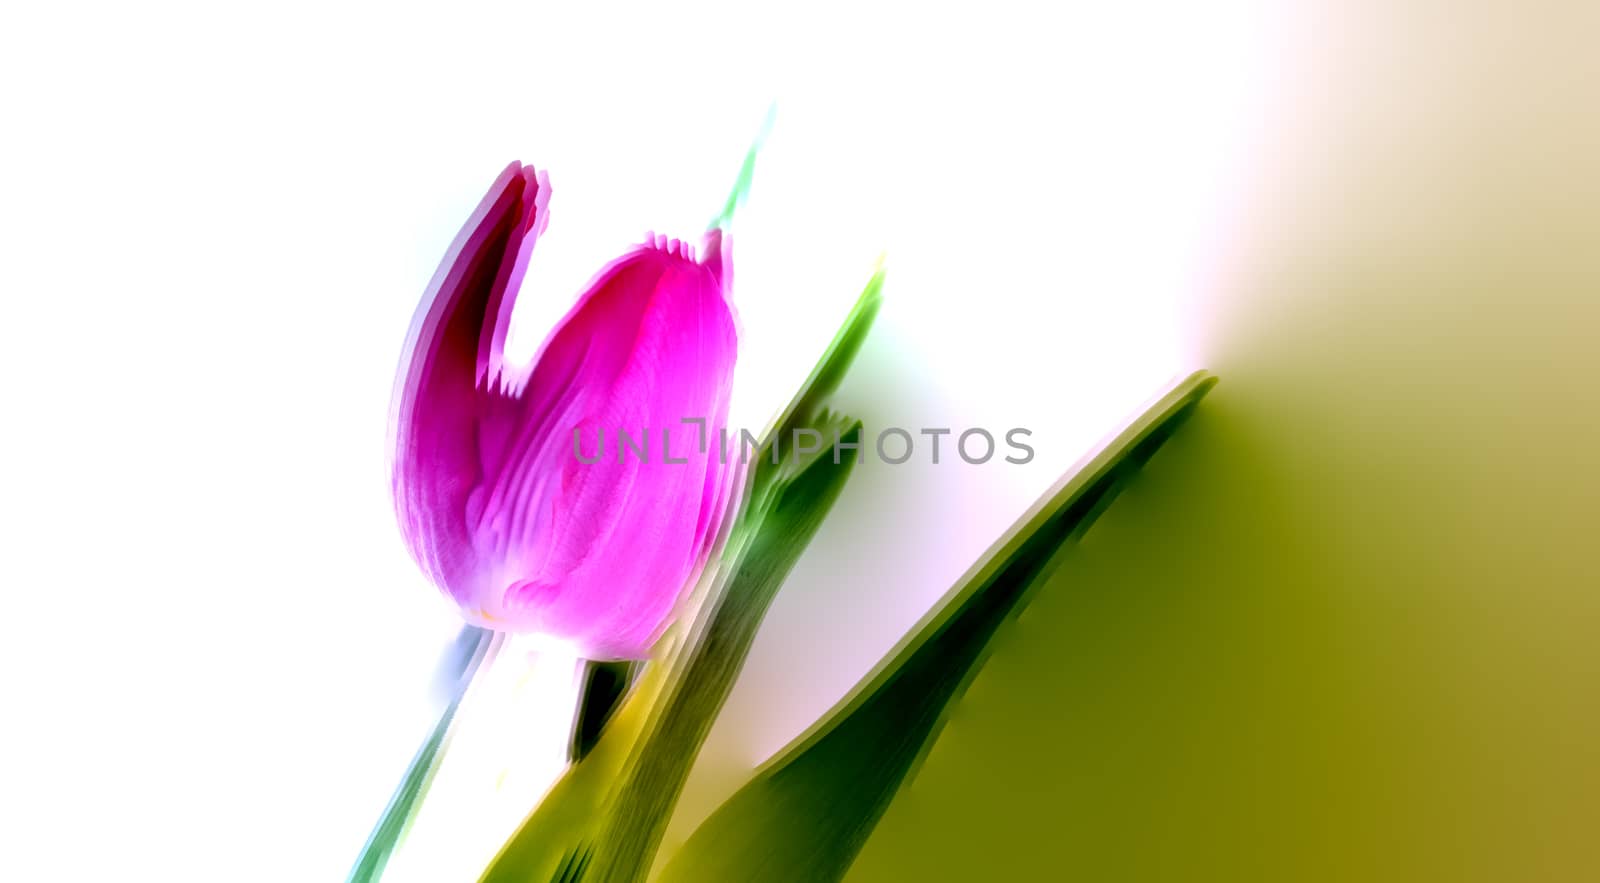 art impression of a  pink tulip flower with green leave